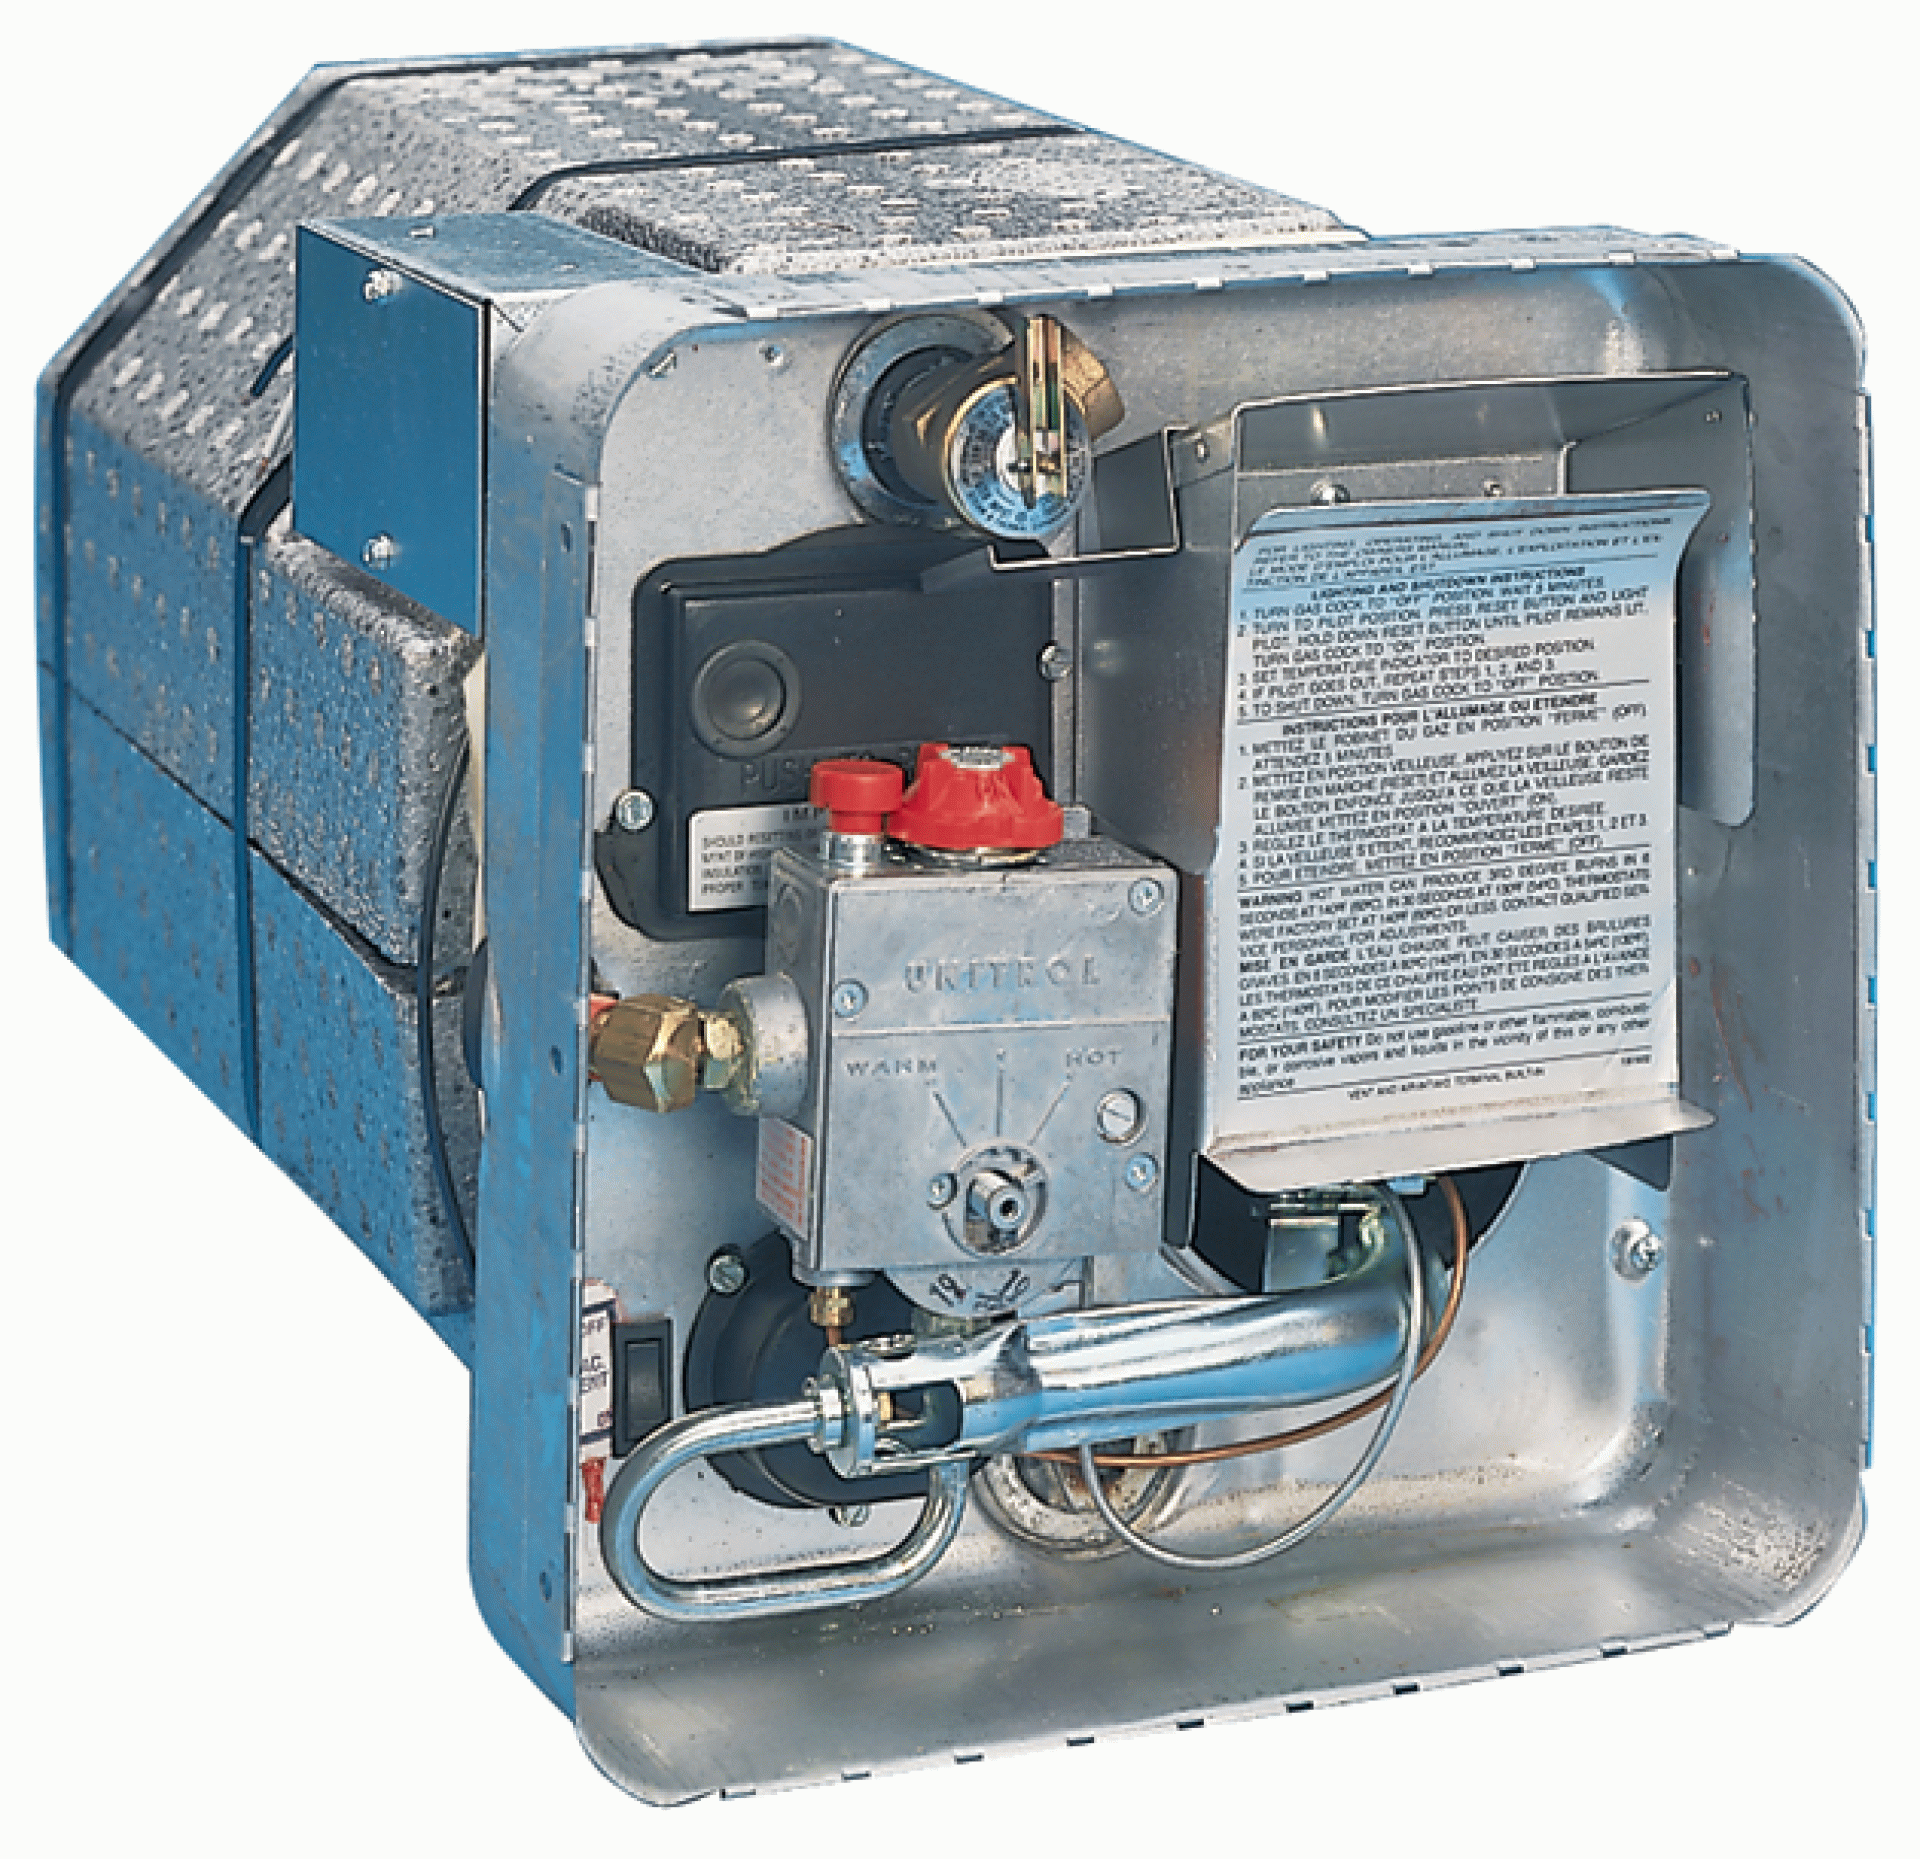 SUBURBAN MFG CO | 5103A | WATER HEATER SW16DEM GAS/ELECTRIC/MOTOR AID SPARK IGNITION 16 Gallon